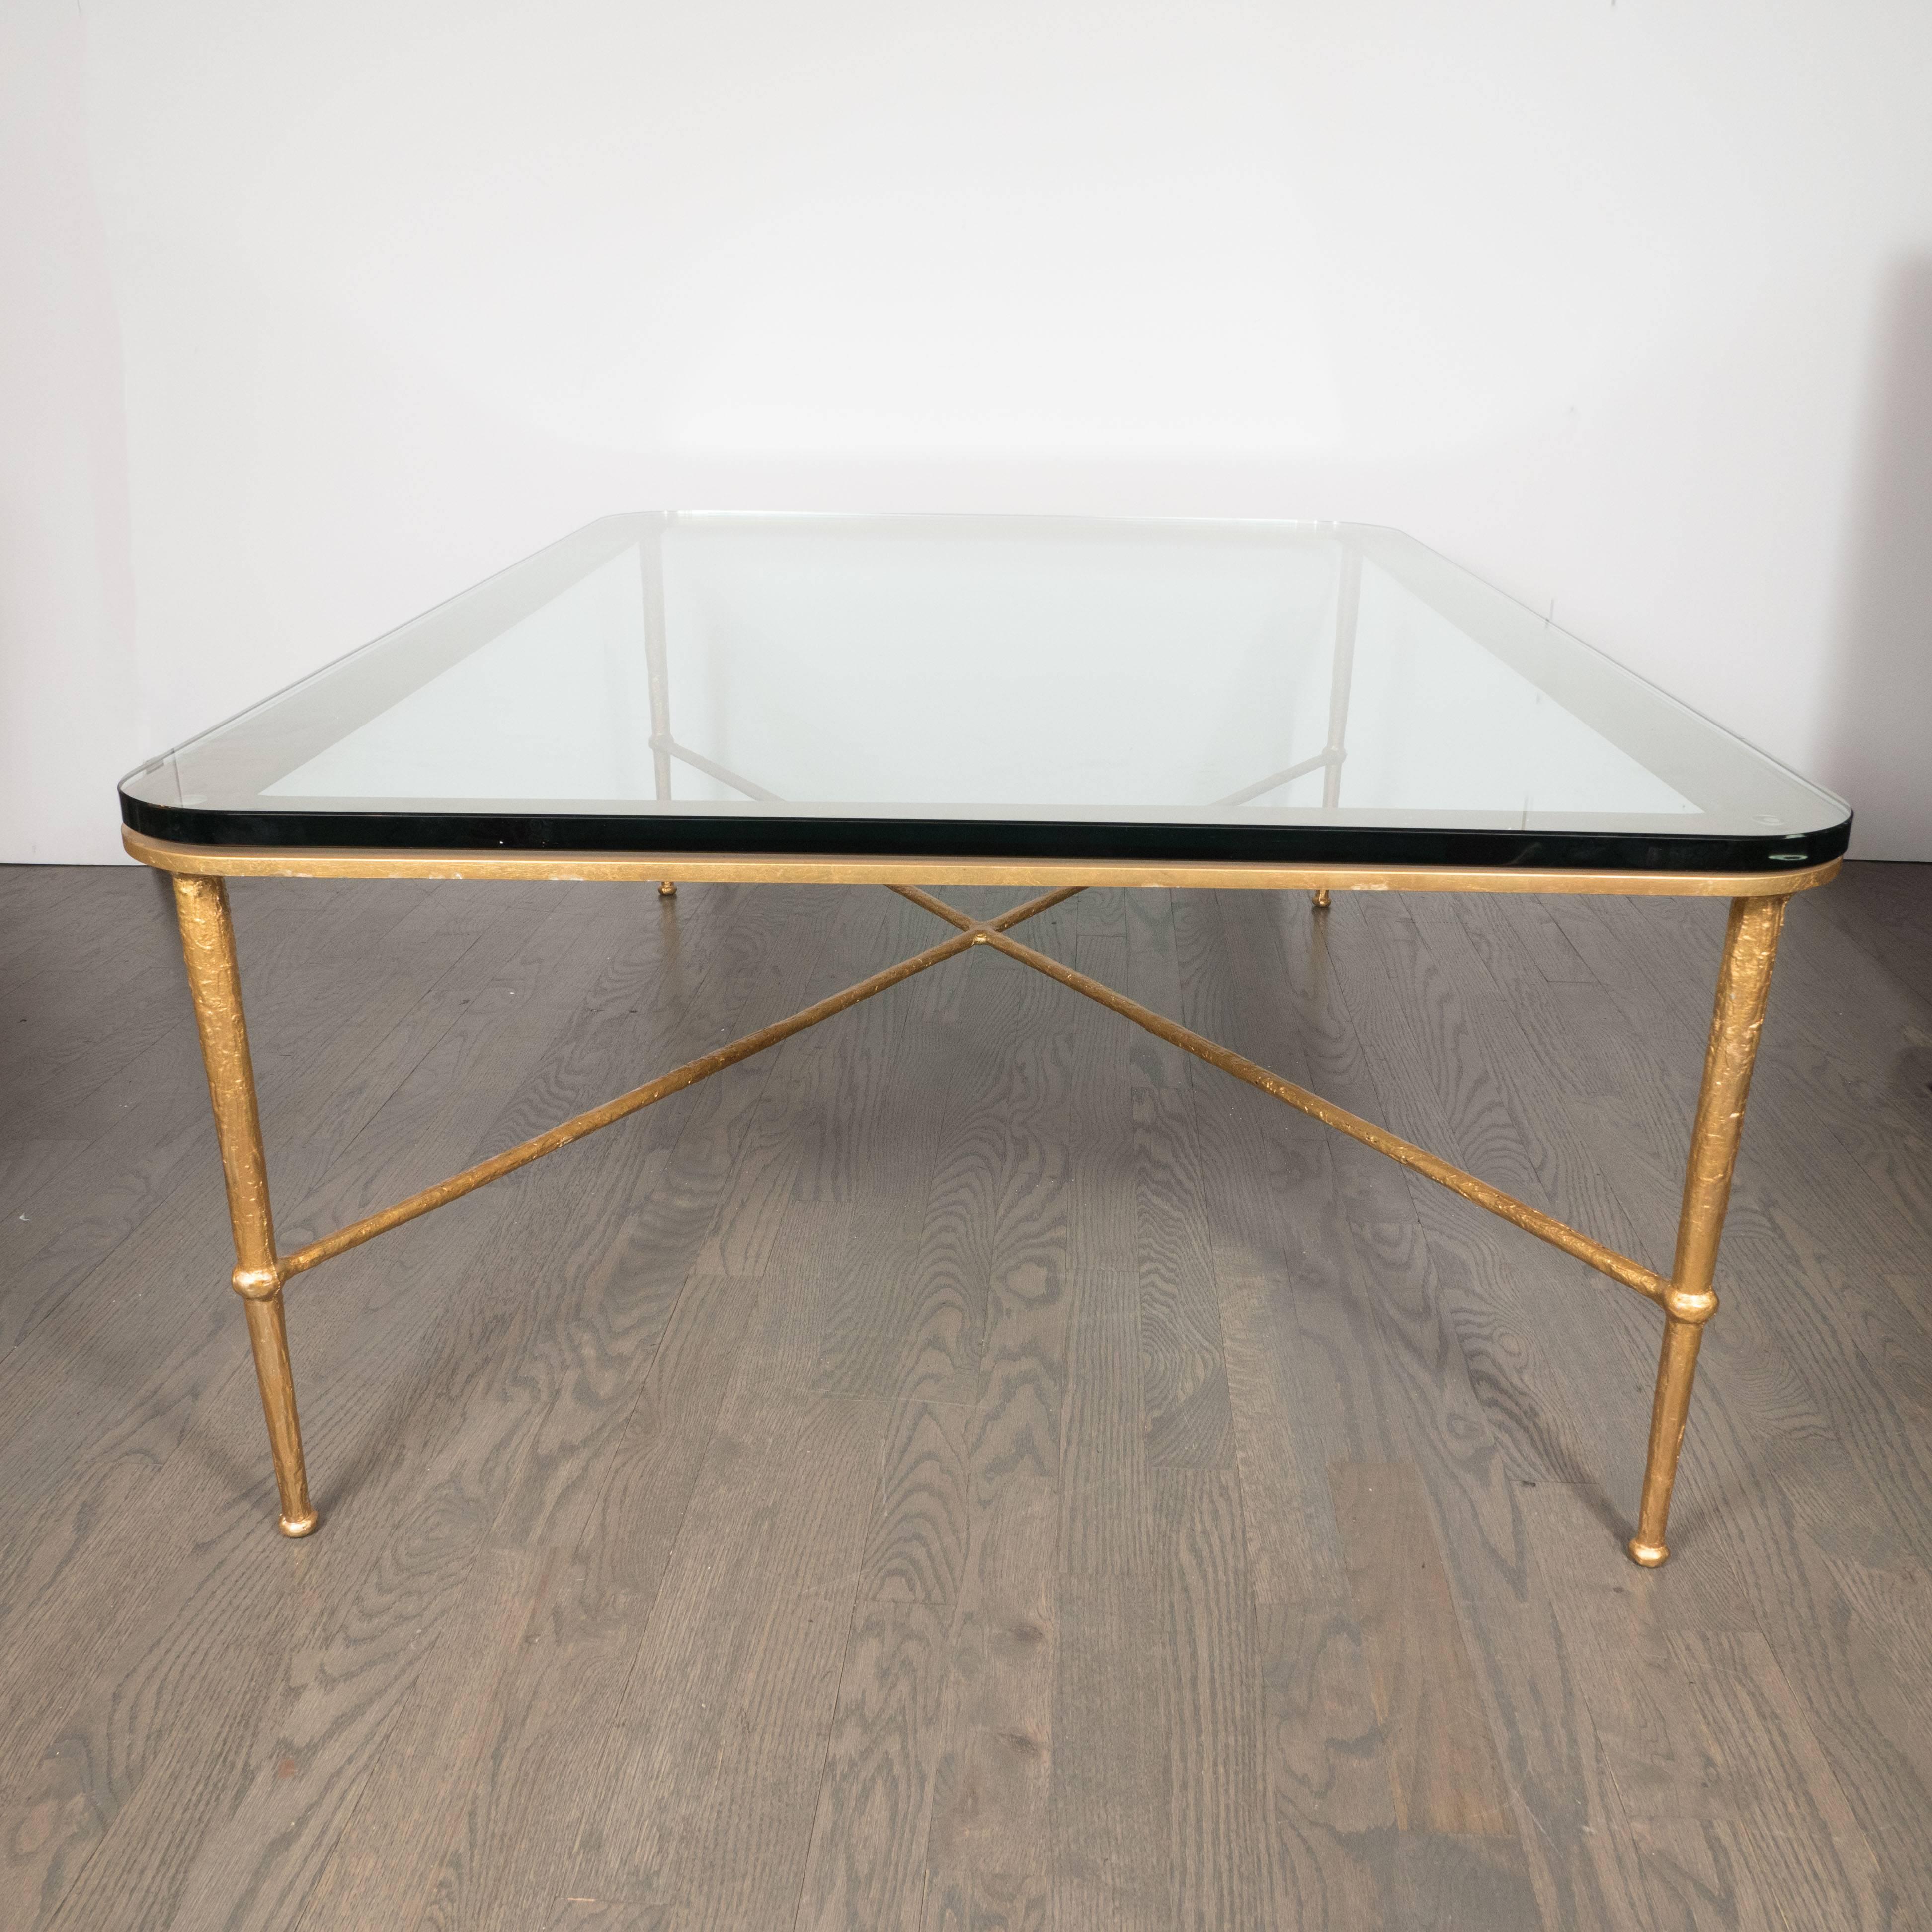 20th Century Mid-Century Modern American Gold X-Form Cocktail Table